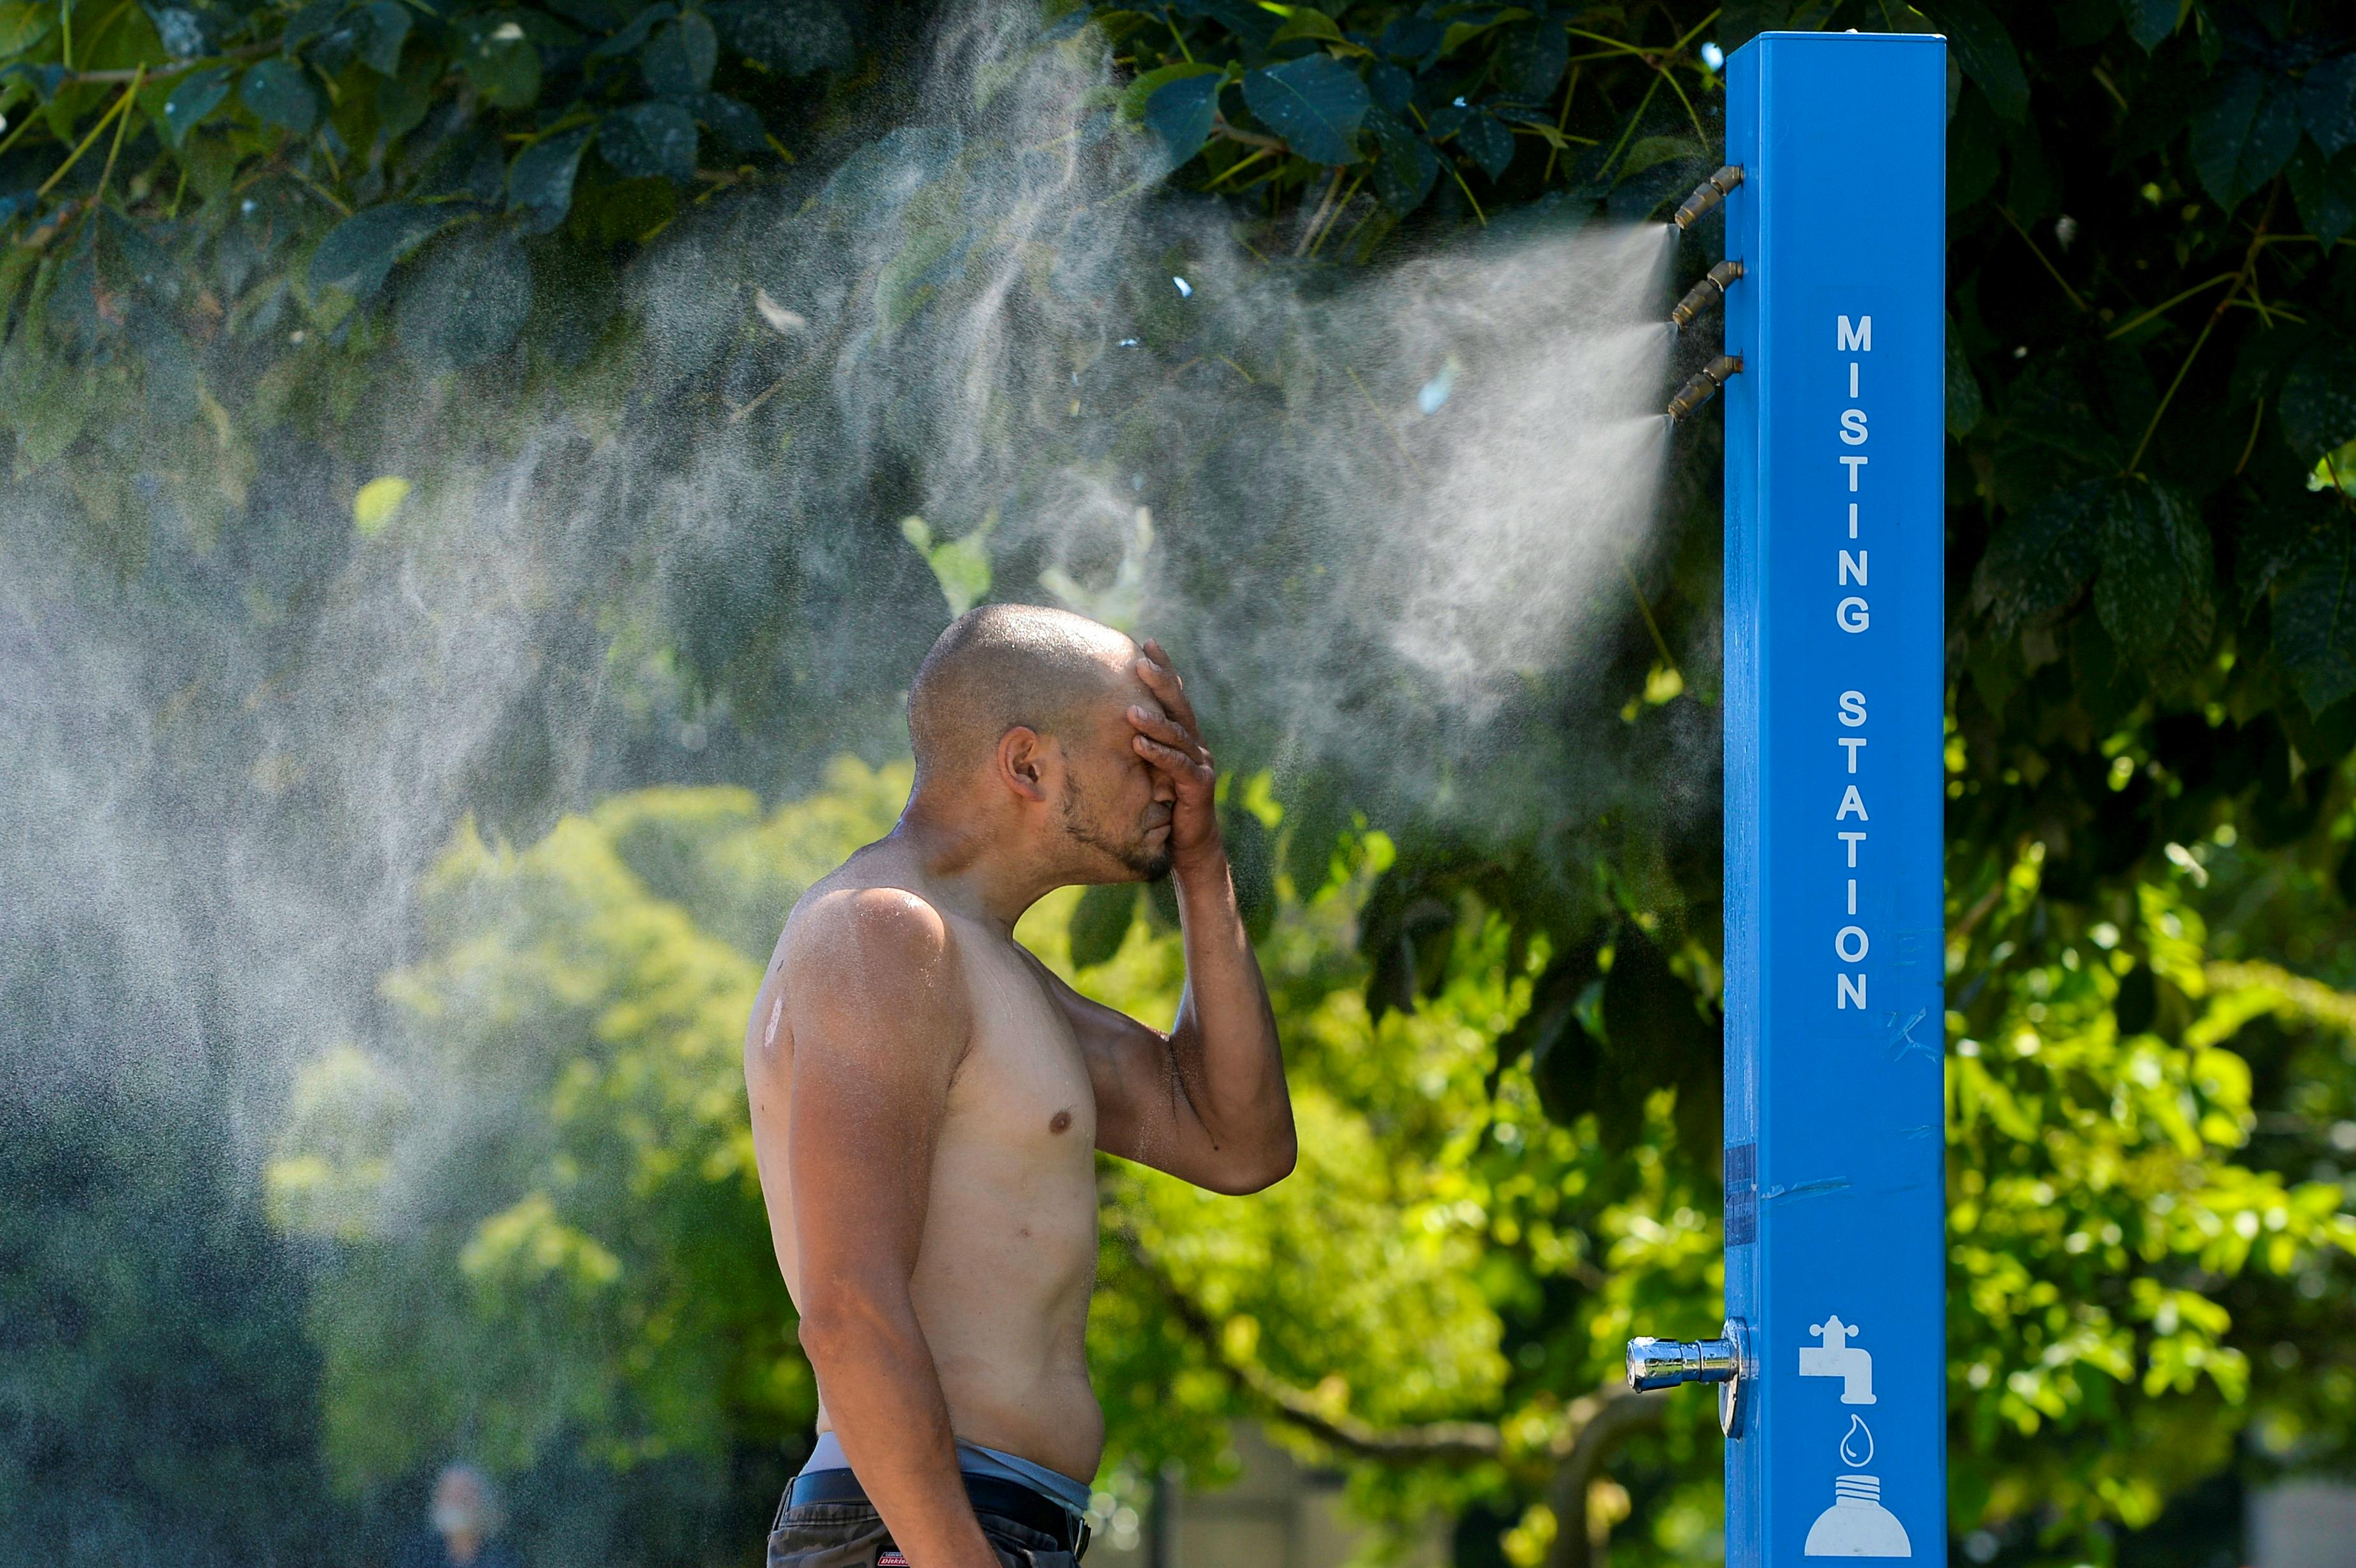 B.C. heat wave shatters Canadian record for highest temperature ever  recorded